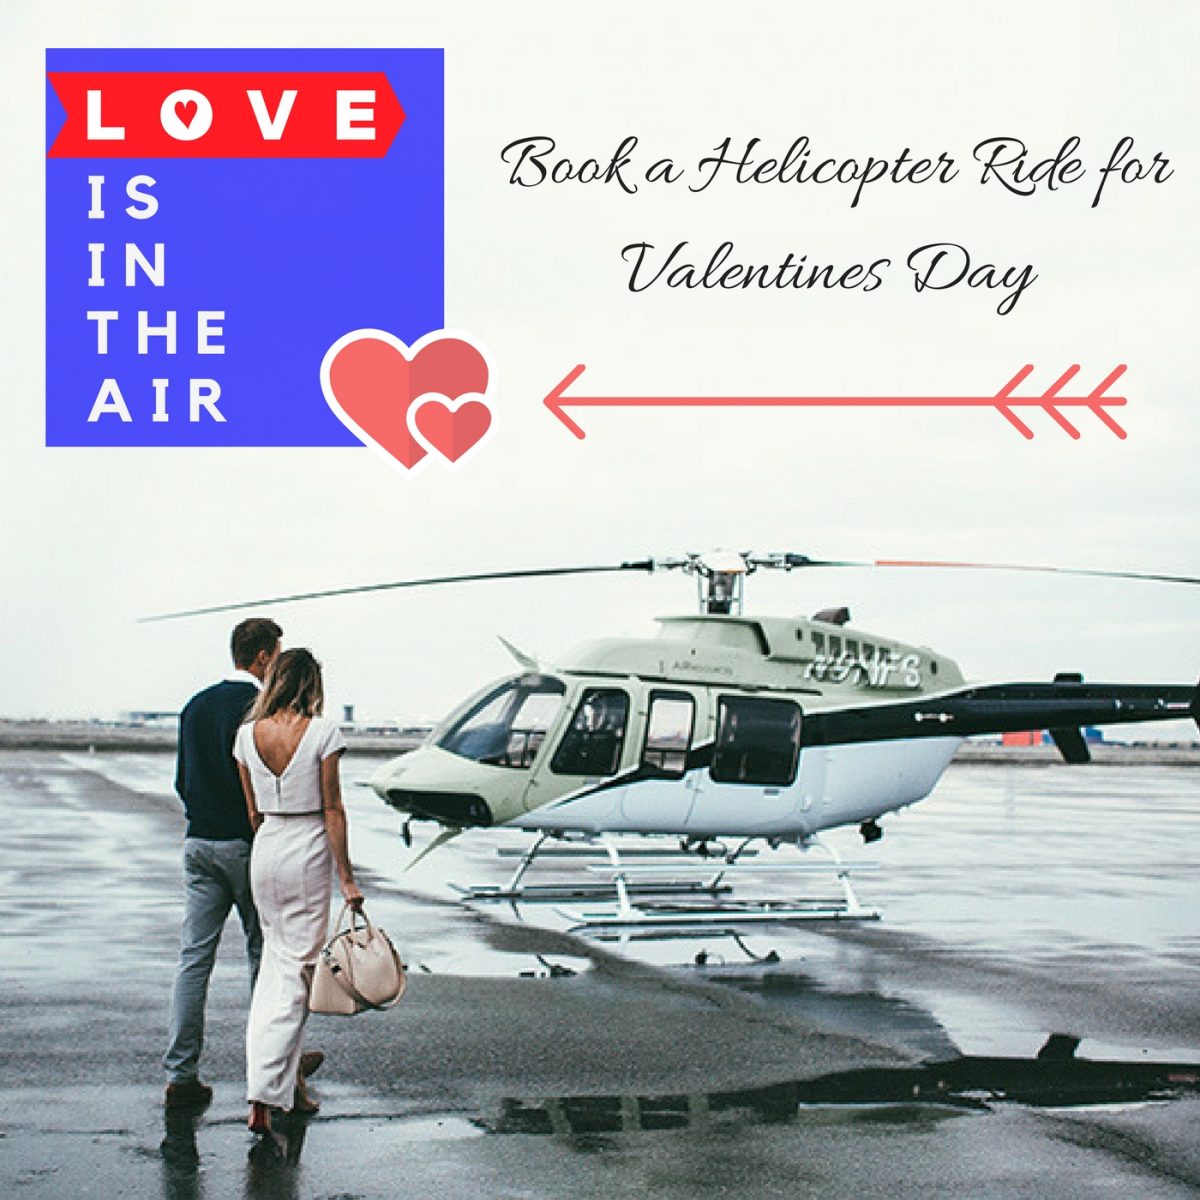 Helicopter Ride for Valentines Day